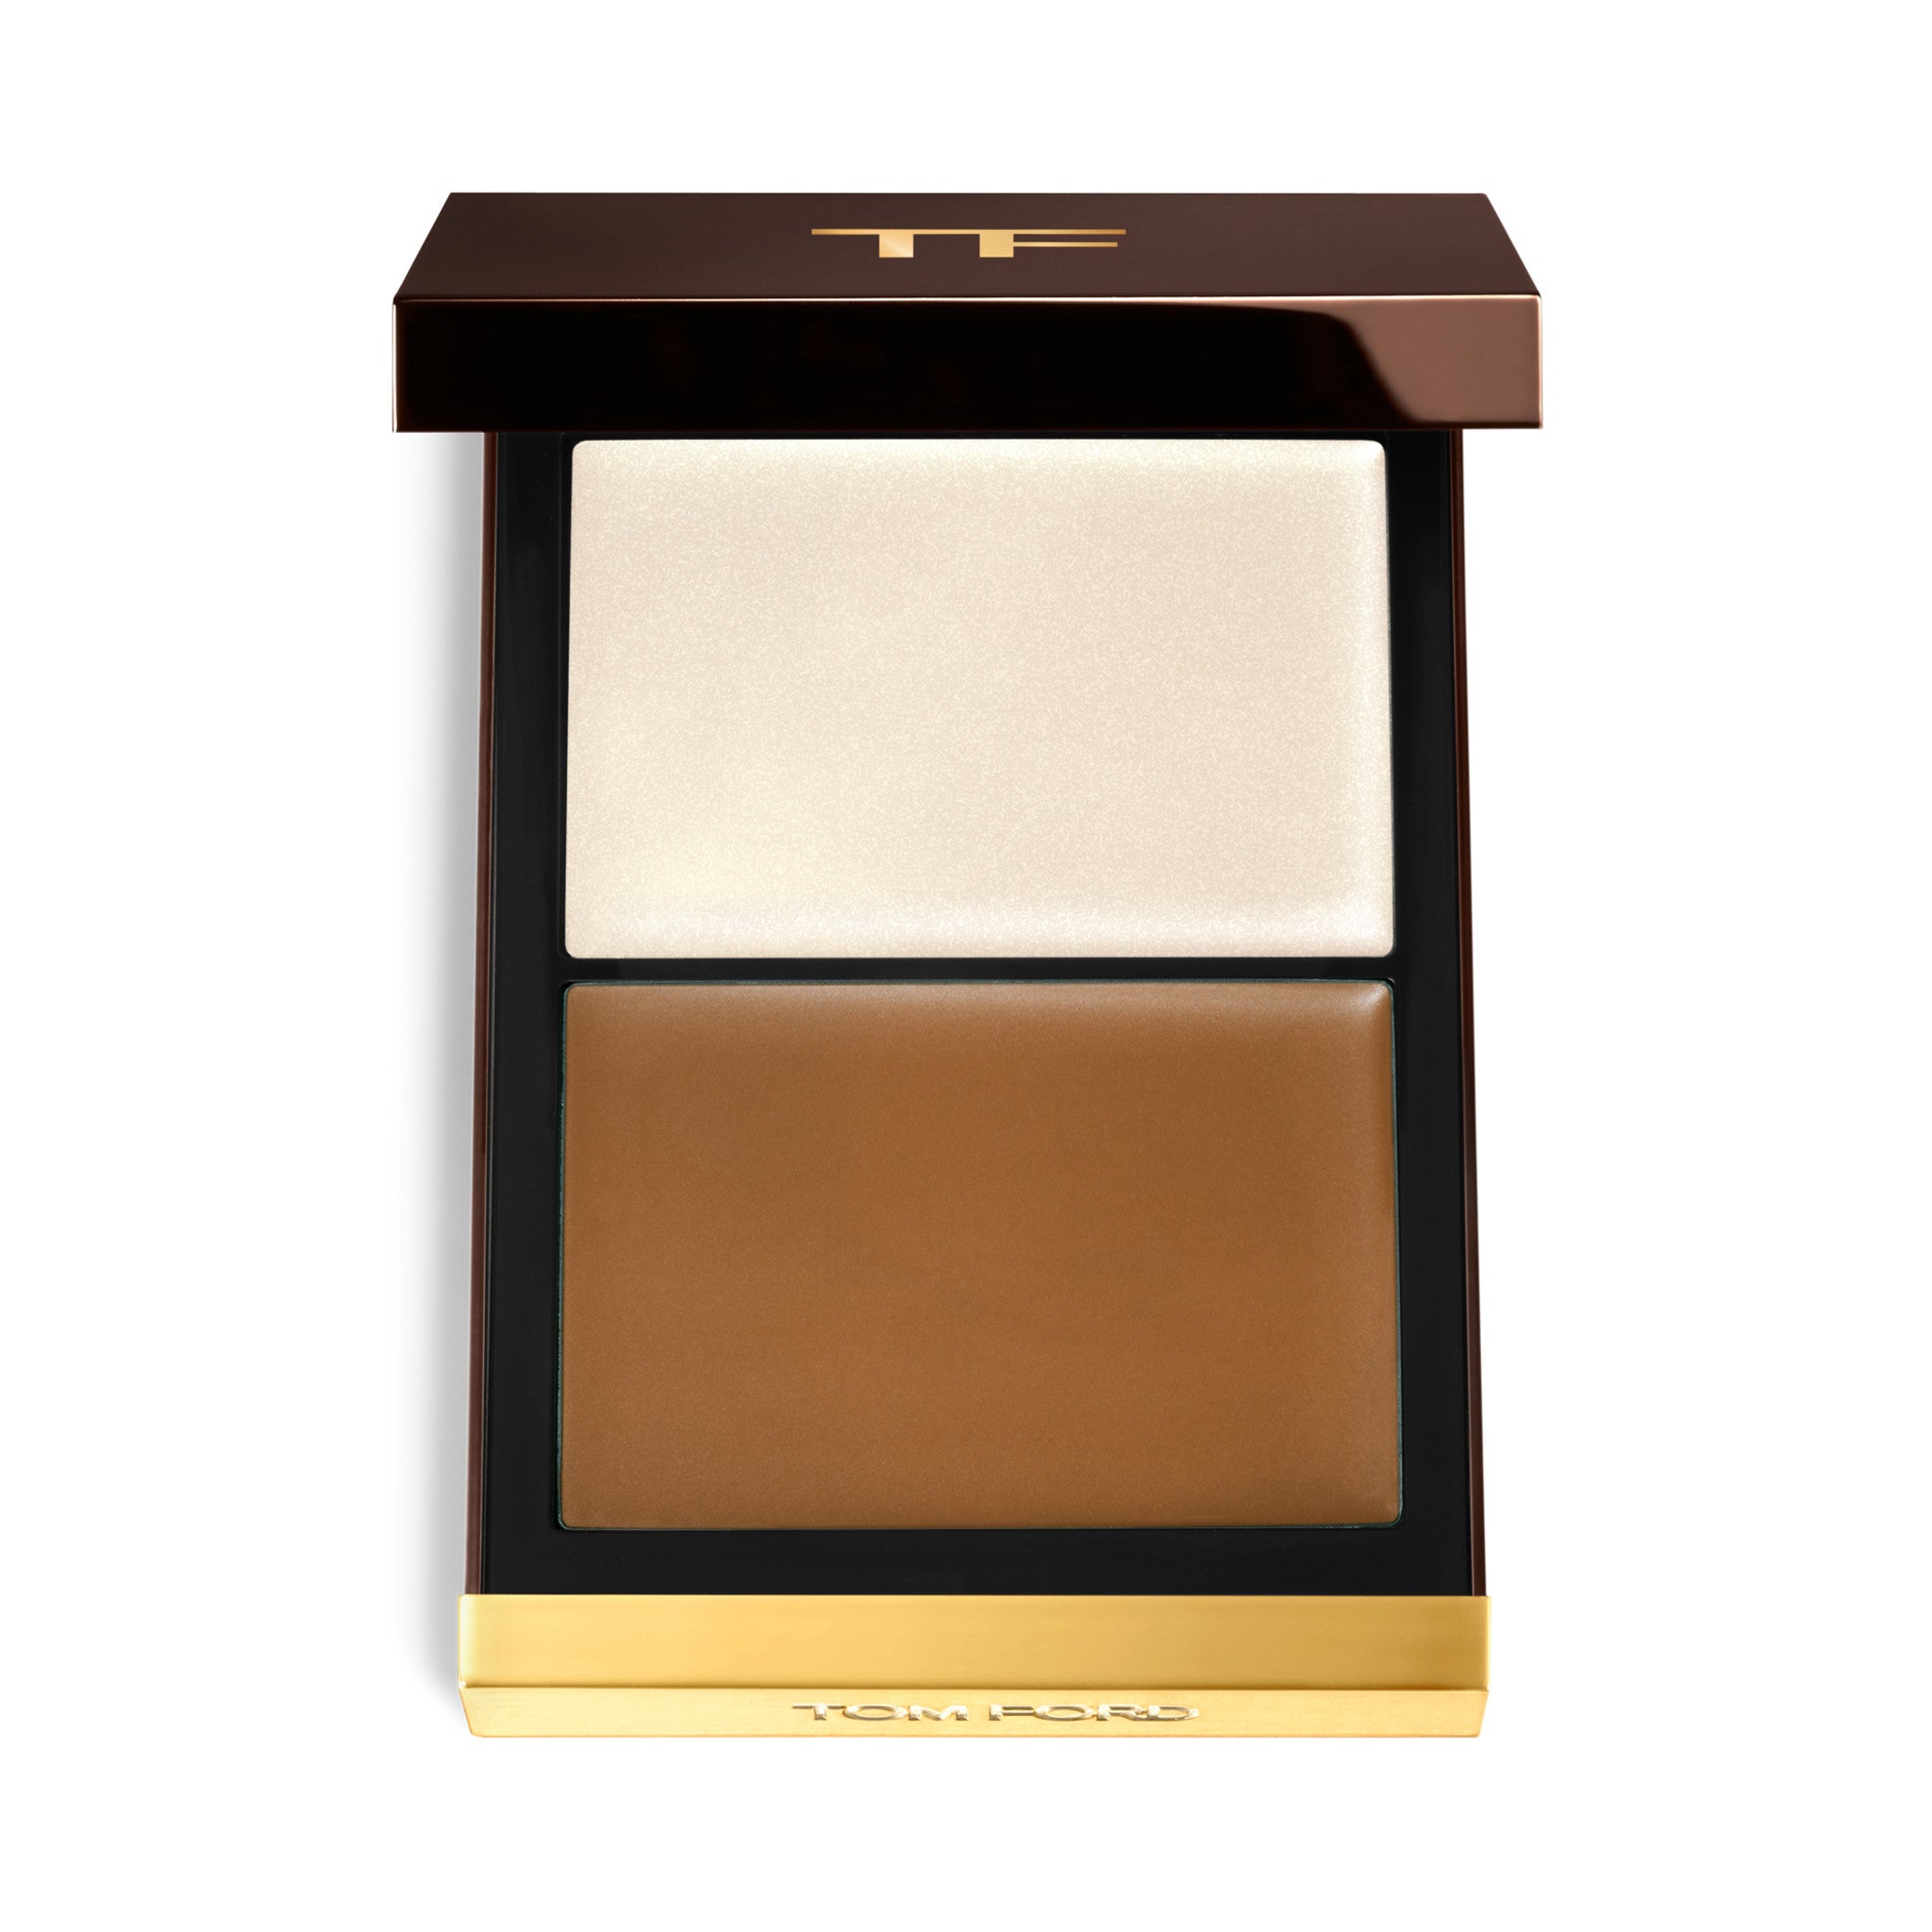 Tom Ford Shade and Illuminate Contour Duo Color/Shade variant: Intensity 1.0 main image.